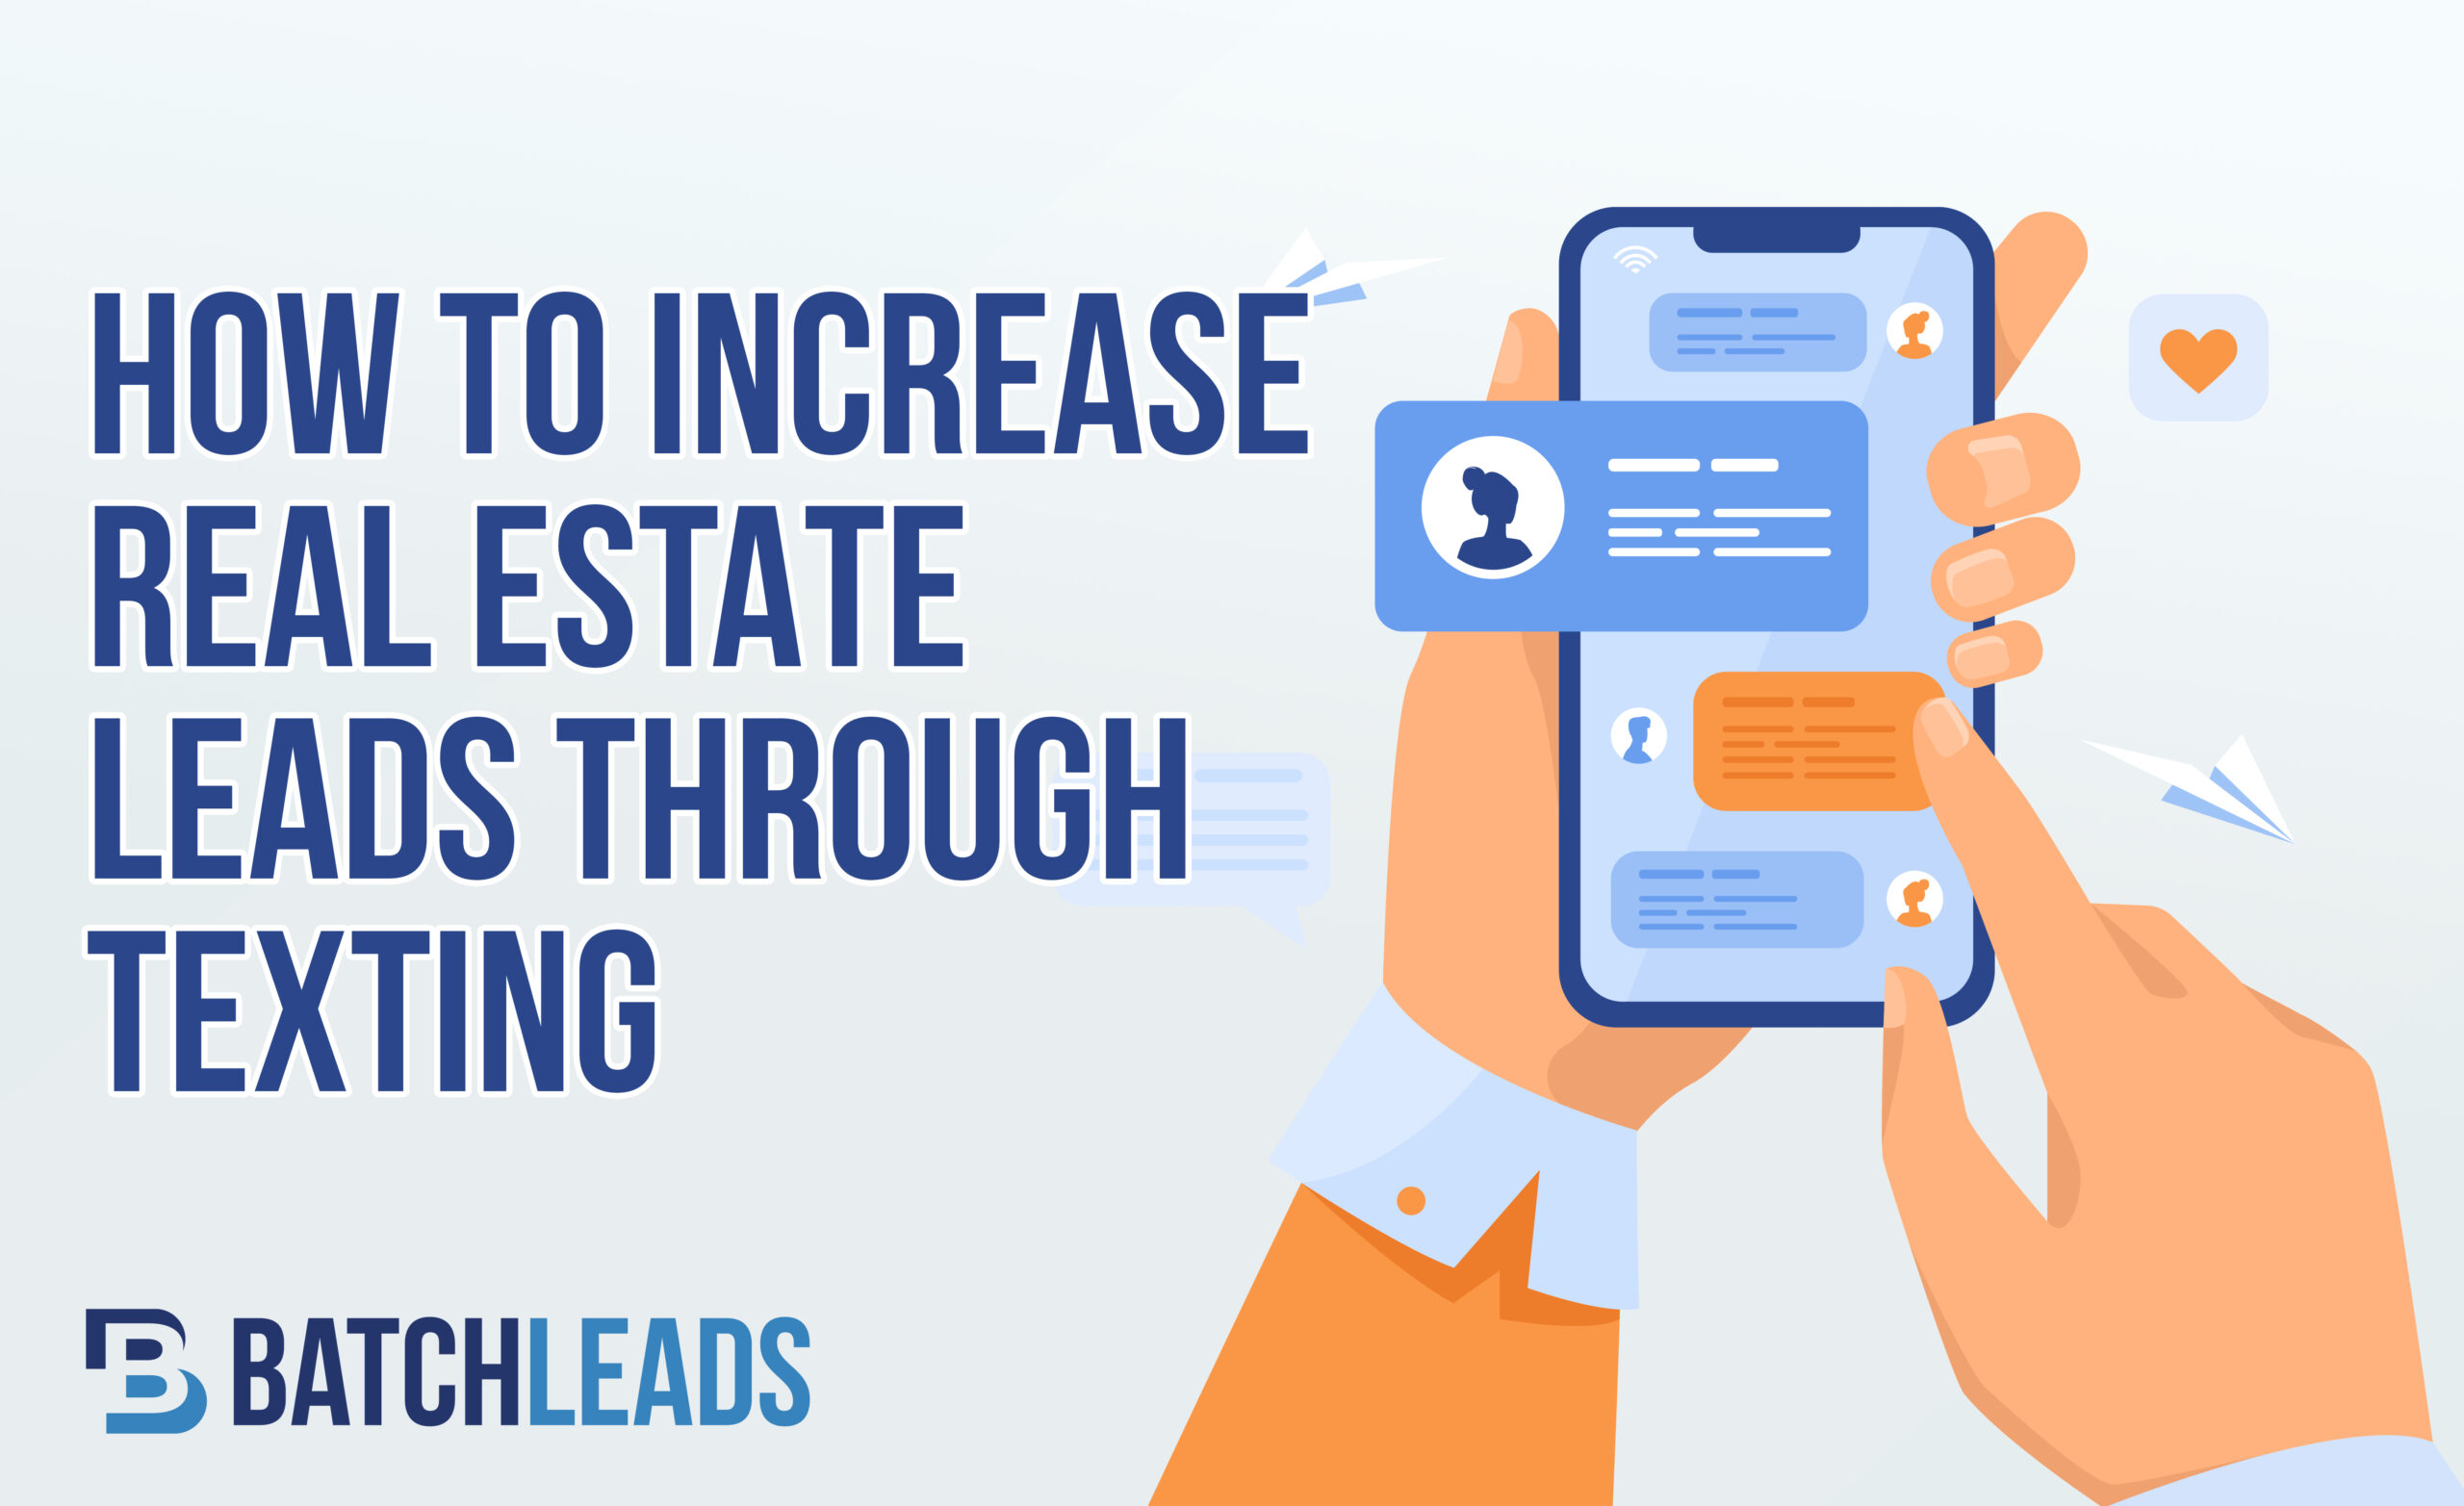 How To Increase Real Estate Leads Through Texting